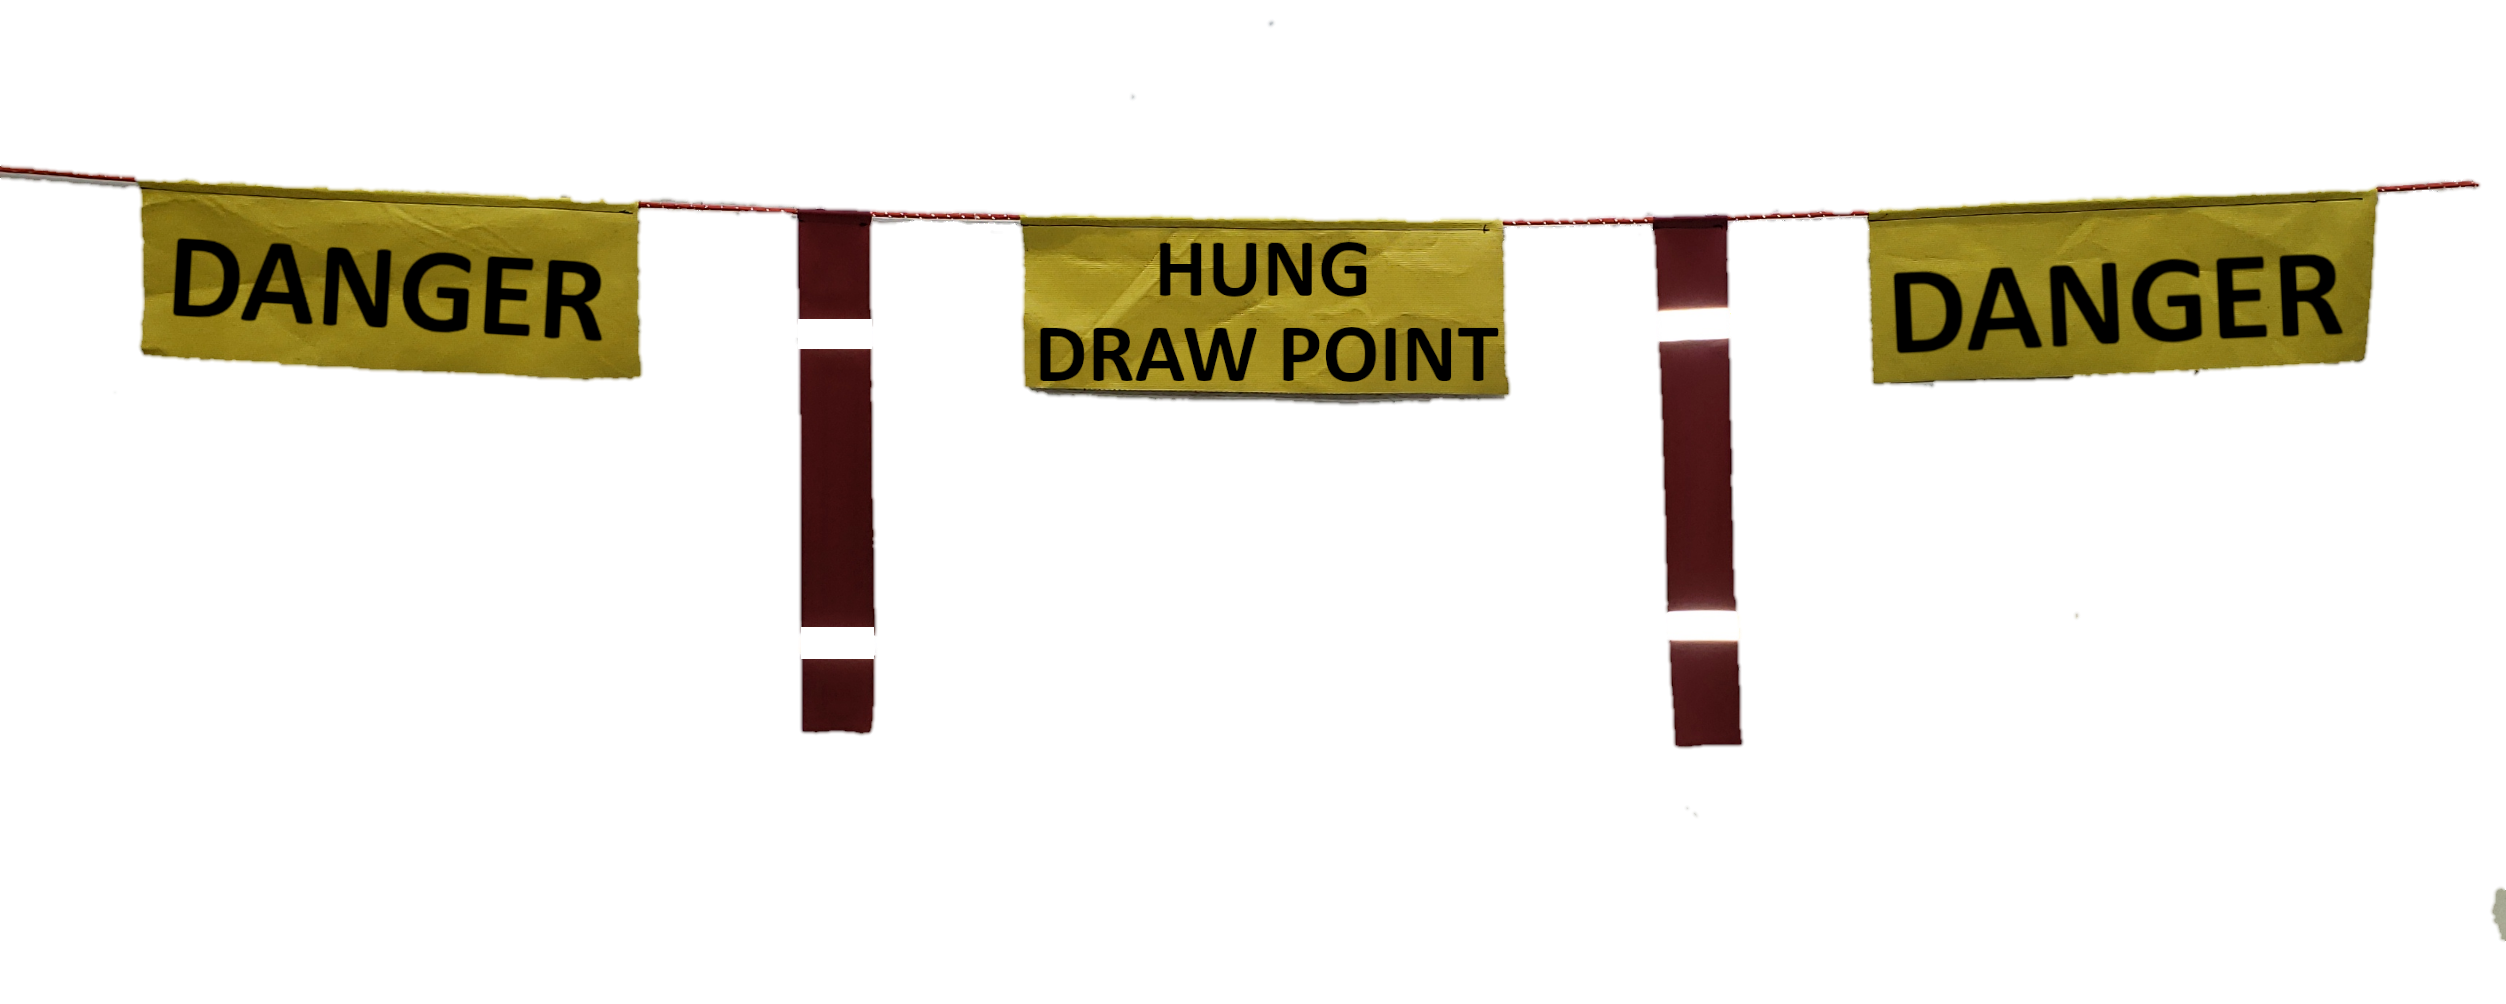 HUNG DRAW POINT BARRICADE